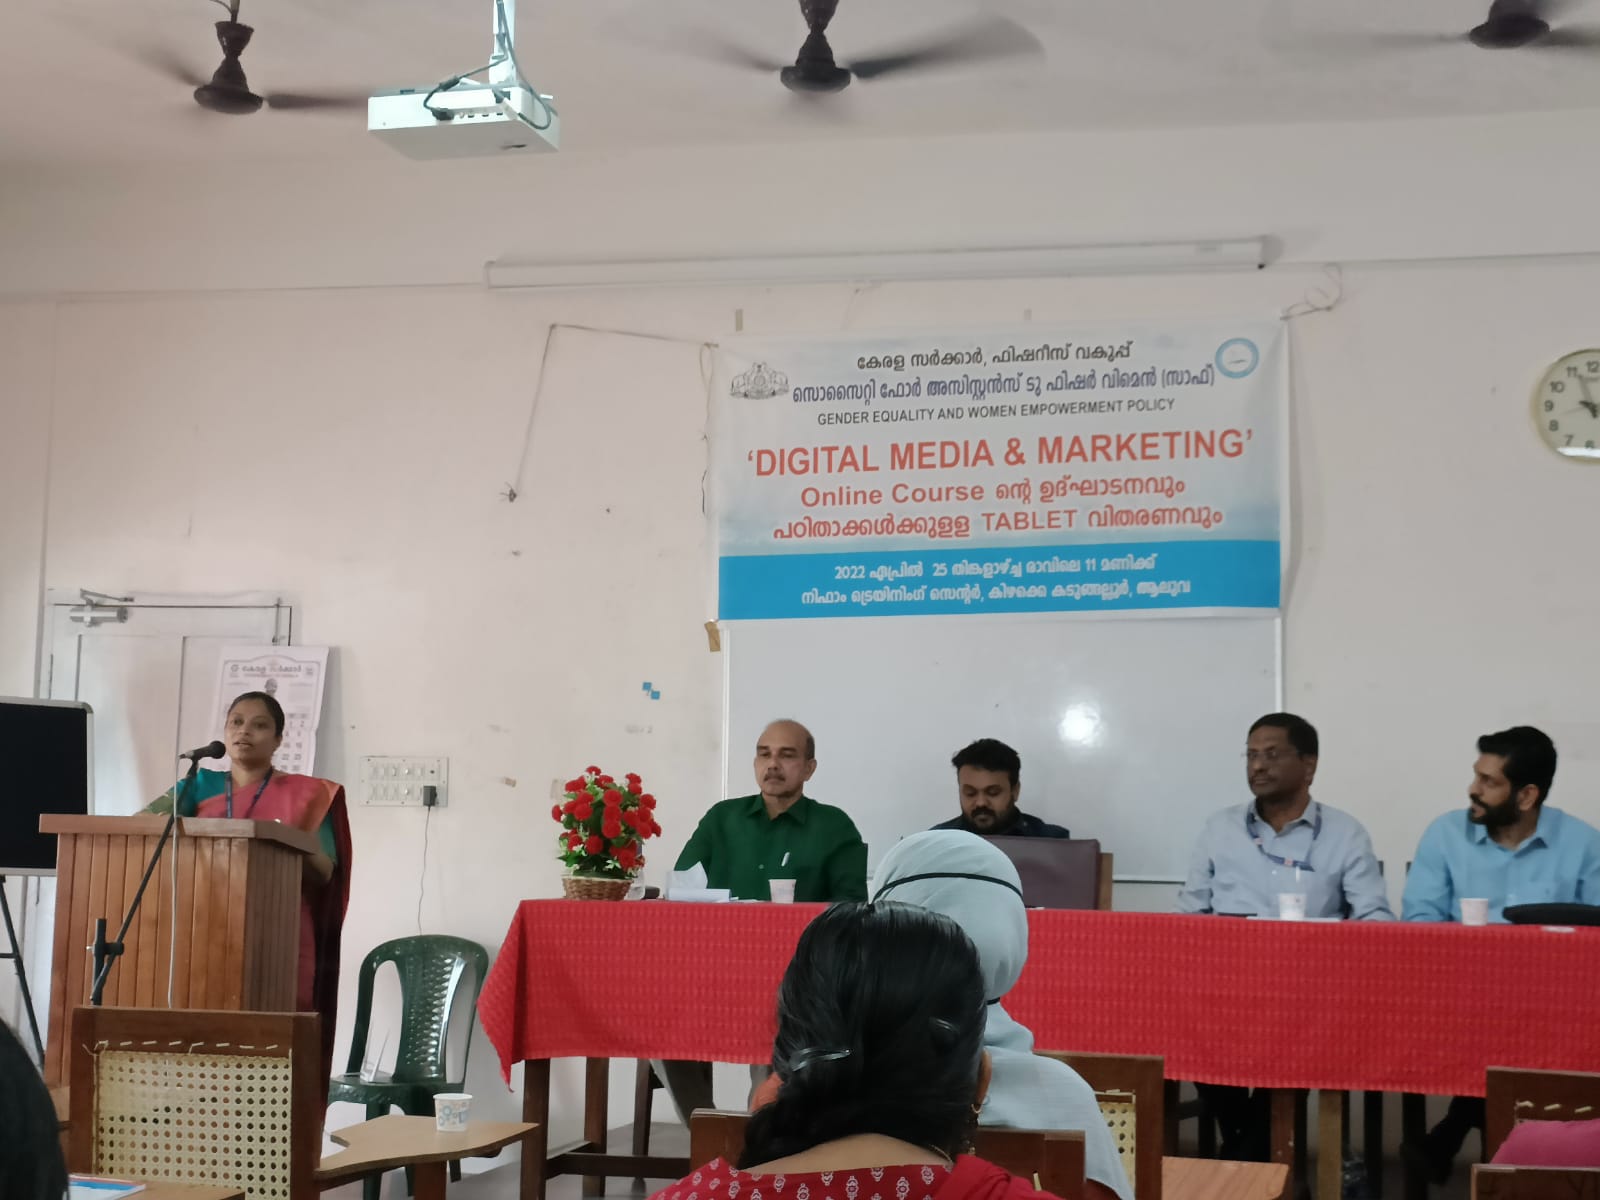 Digital Media& Marketing Online course Inauguration and Tablet distribution